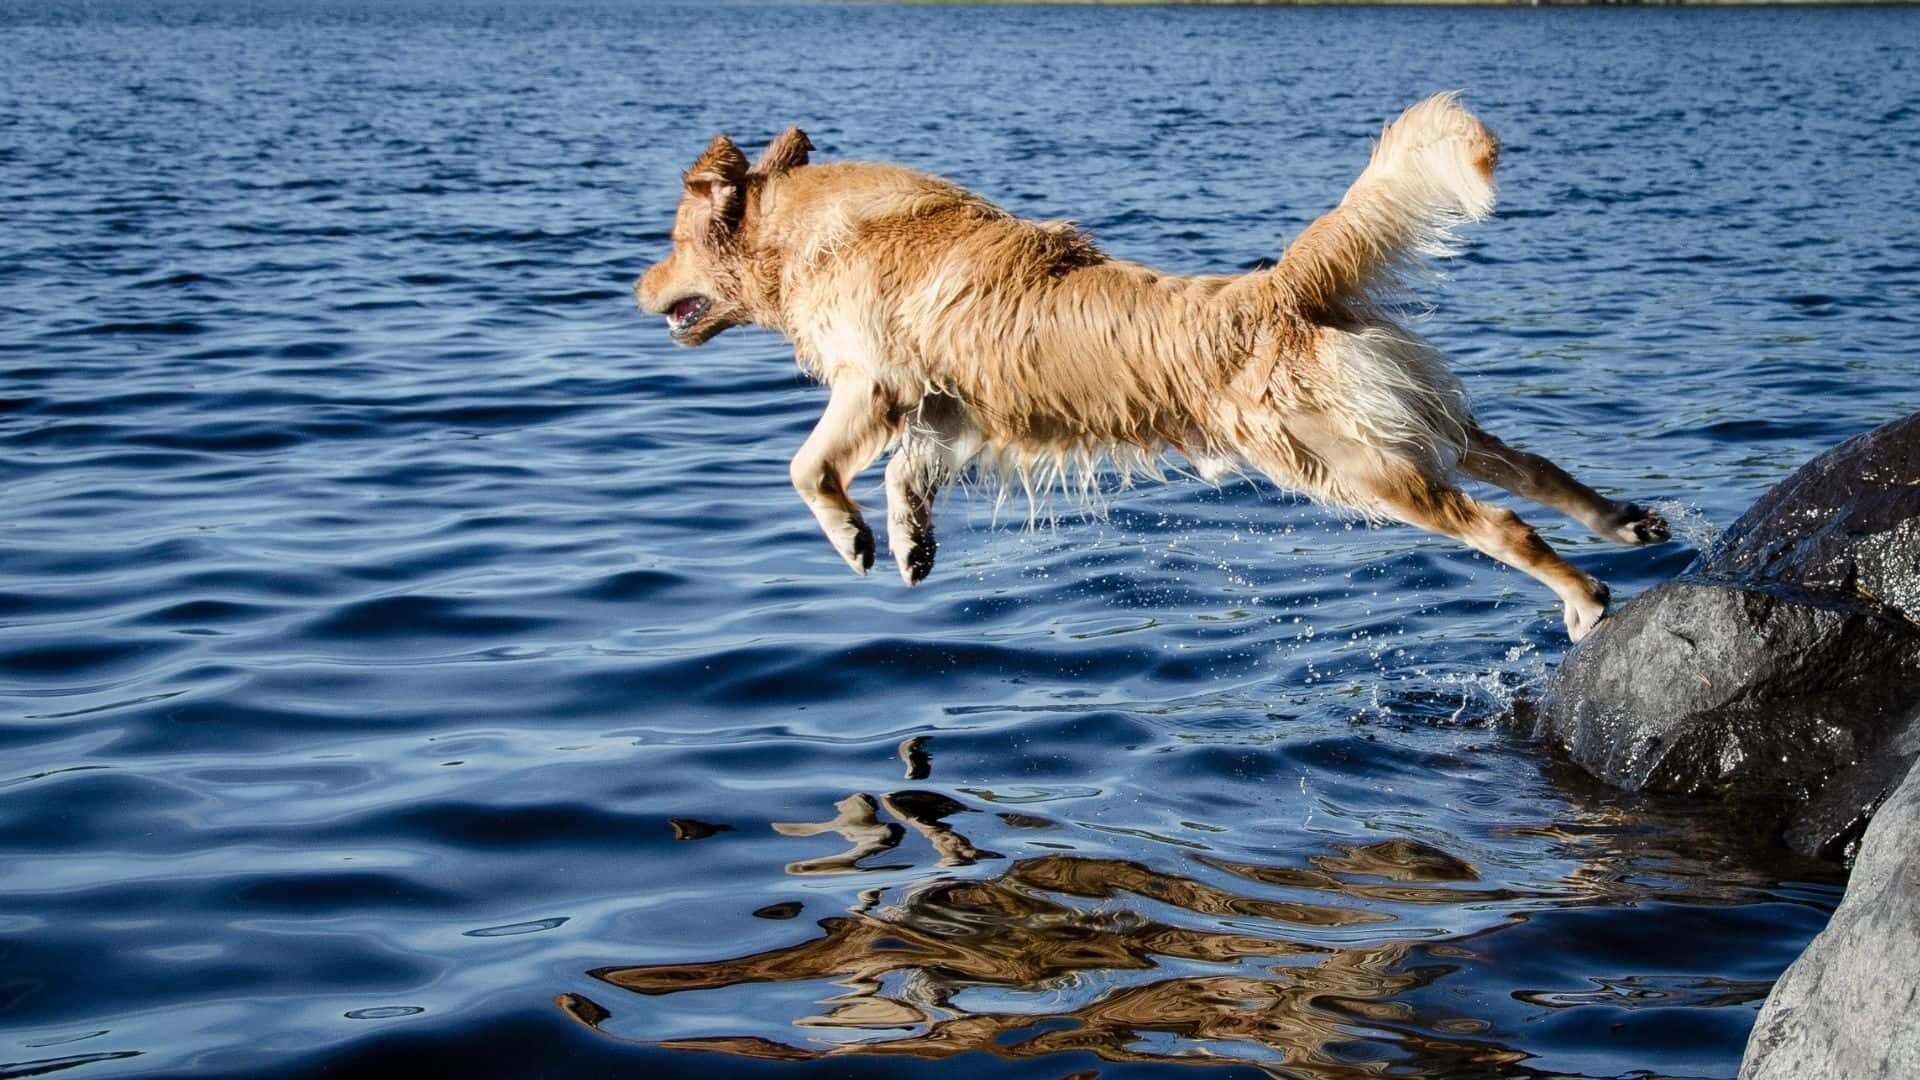 How long can dogs swim?